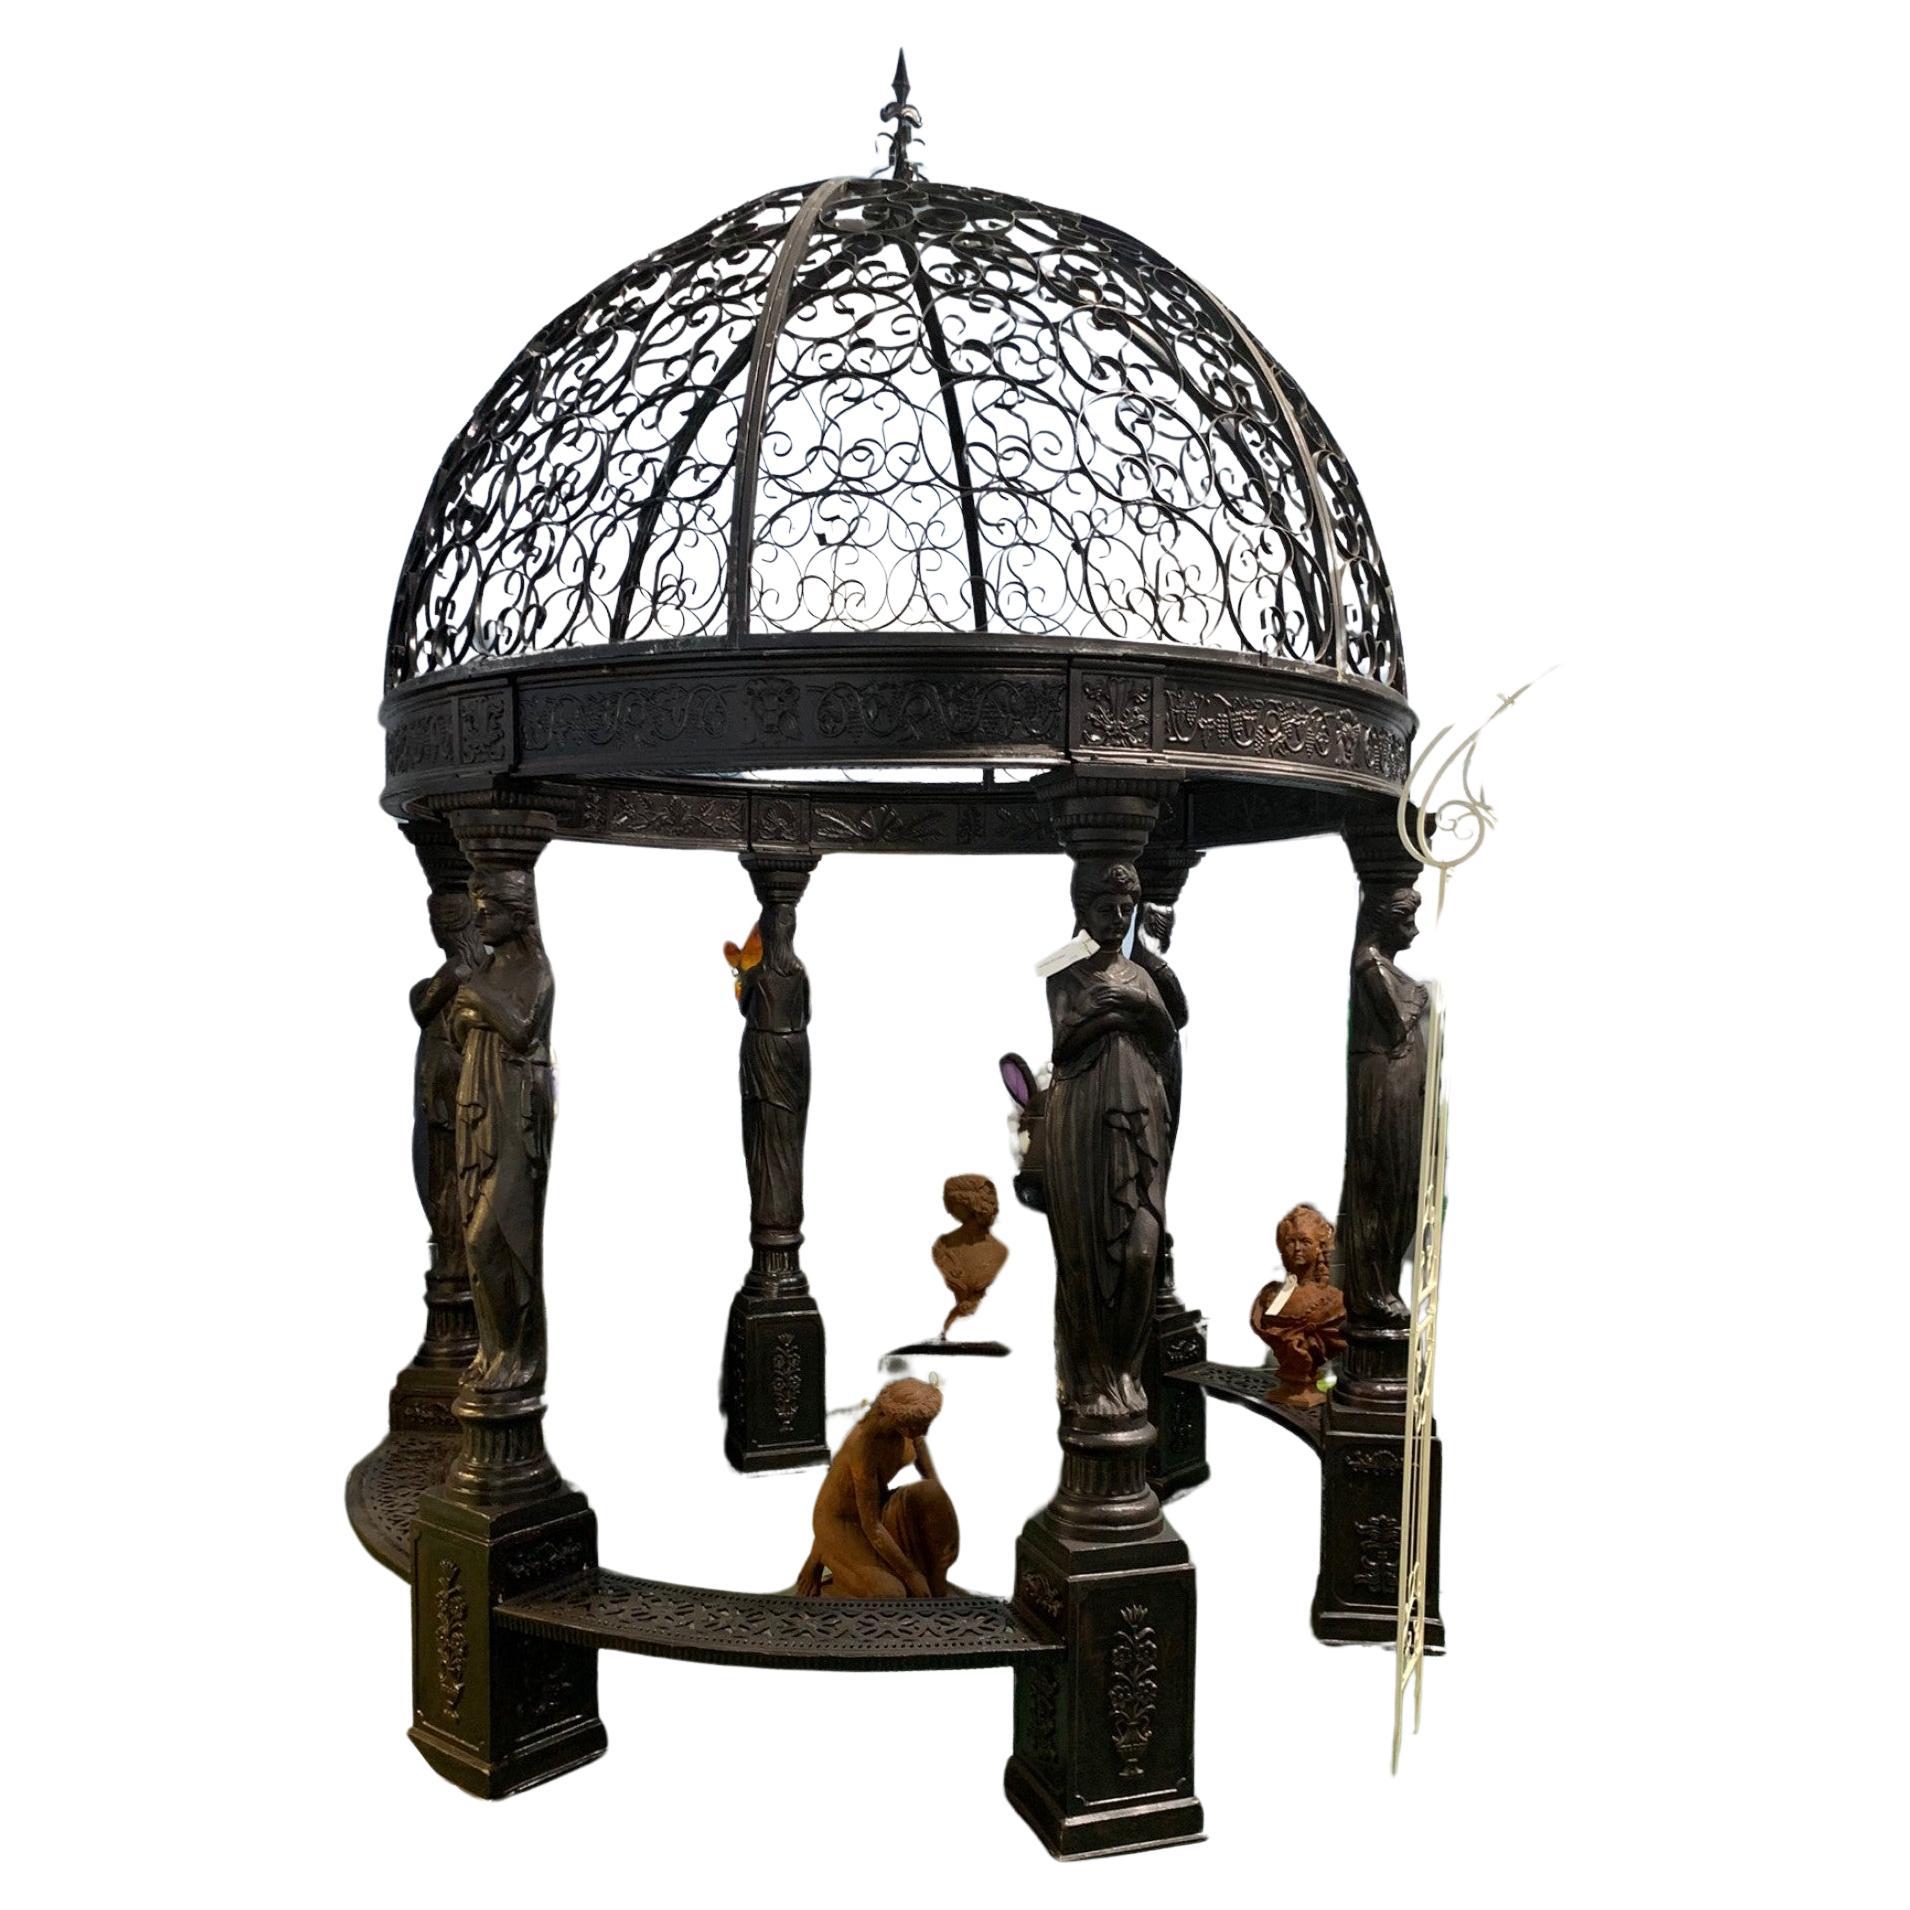 Gorgeous large cast iron gazebo in the Victorian manner
Get this in time for summer and for Pimms on the lawn
Six architectural maidens act as supports to the canopy
Designed so that vines, creepers and foliage will climb up the structure to offer